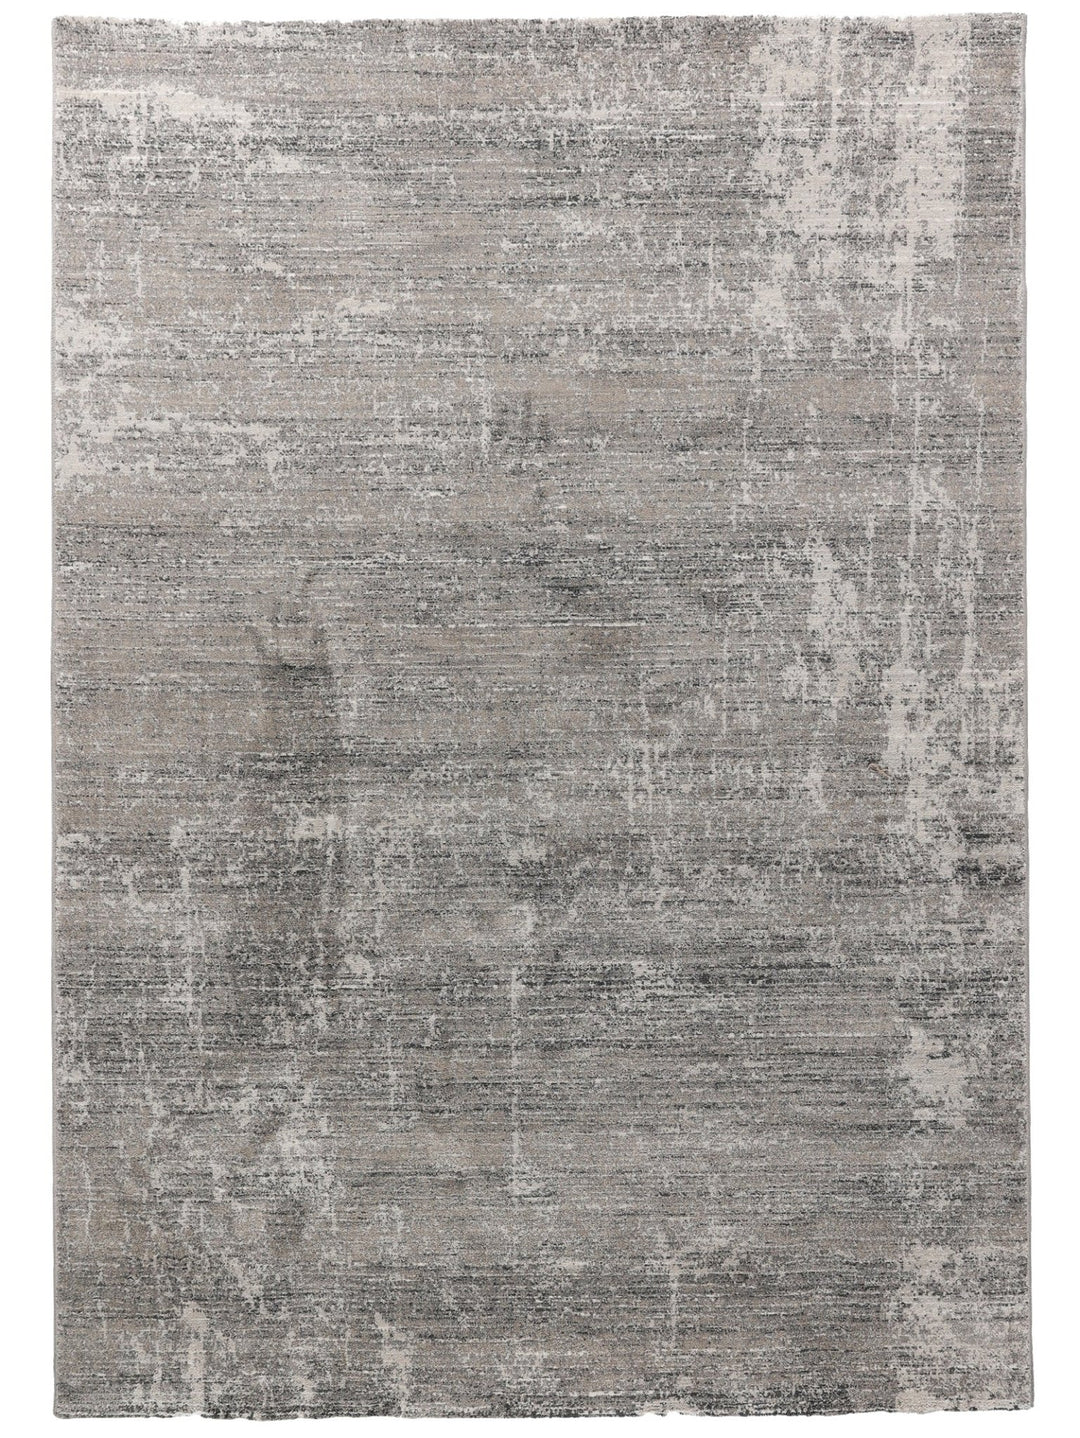 Burnished Rug in Ashes - Rugs - Hertex Haus - Abstract